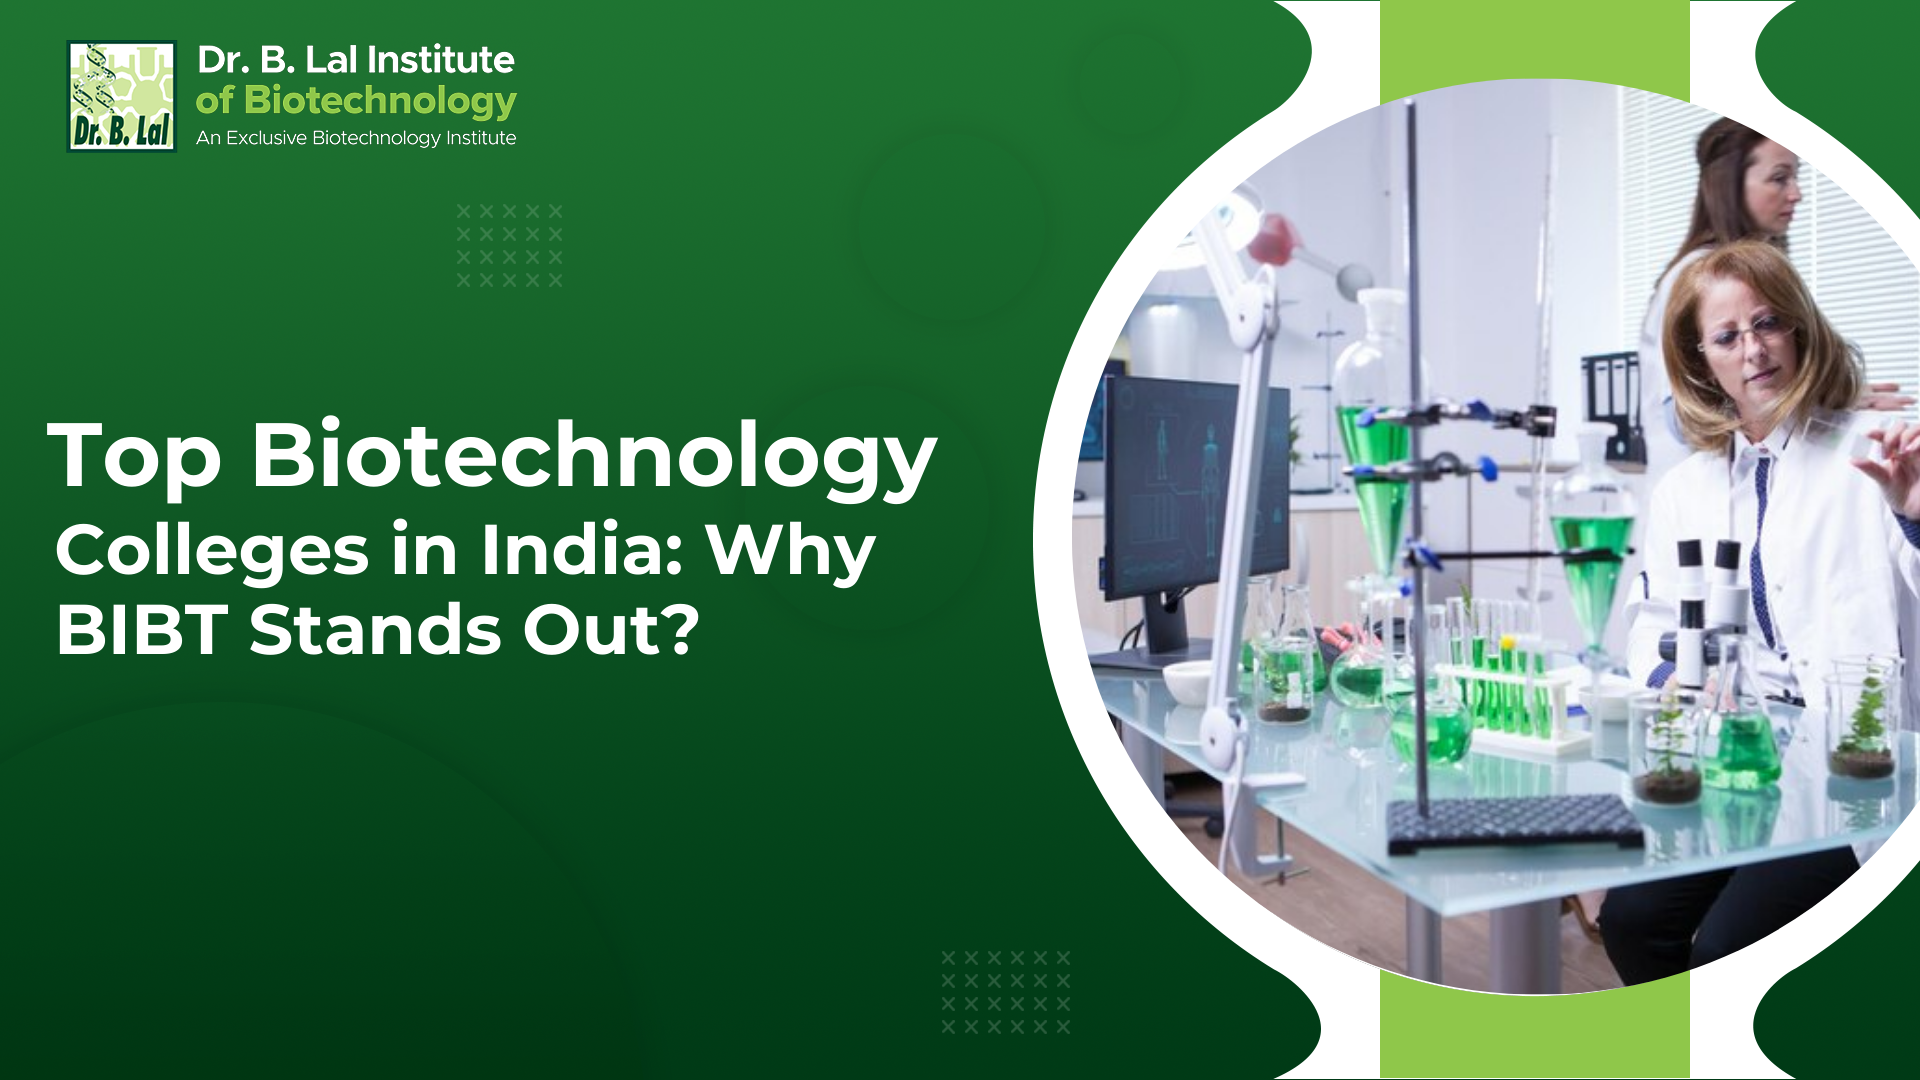 Top Biotechnology Colleges in India: Why BIBT Stands Out?